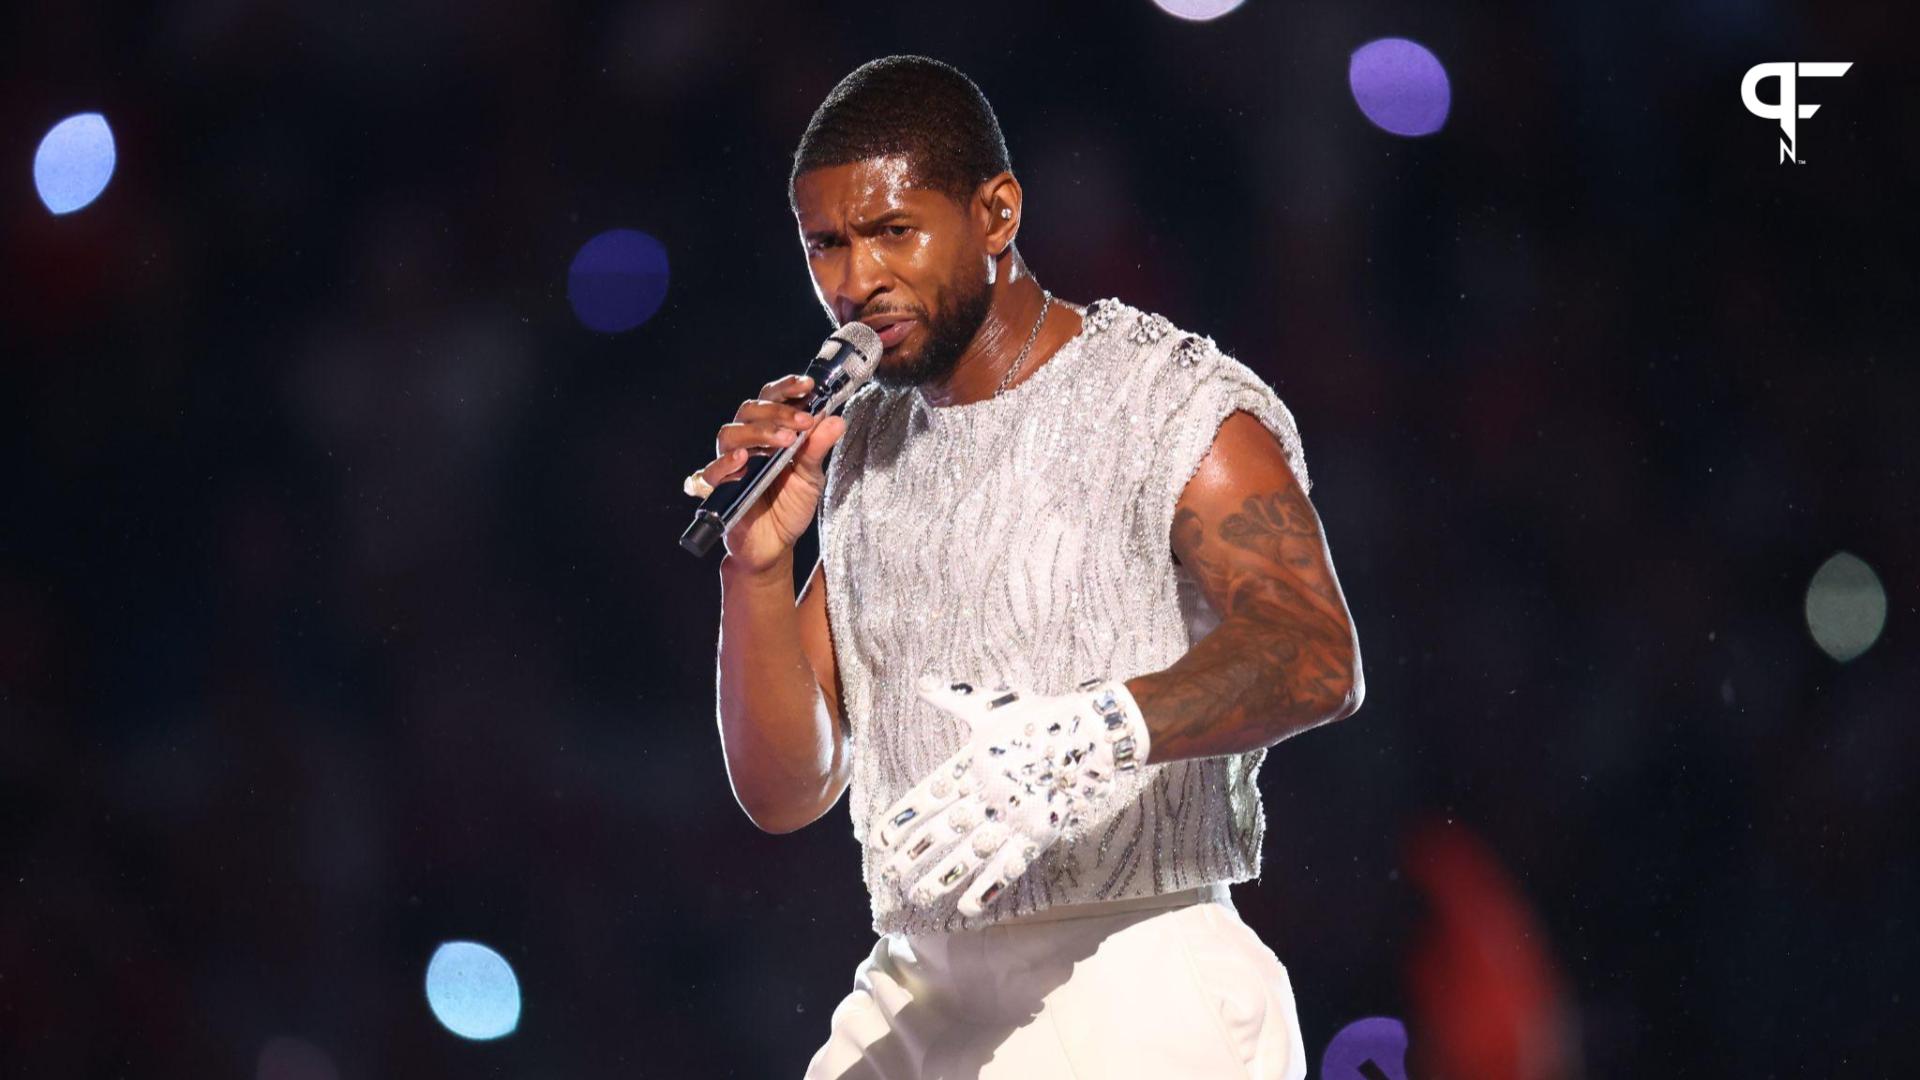 NFL World Reacts to Usher Halftime Performance: 'One of the Better Performances I Have Seen